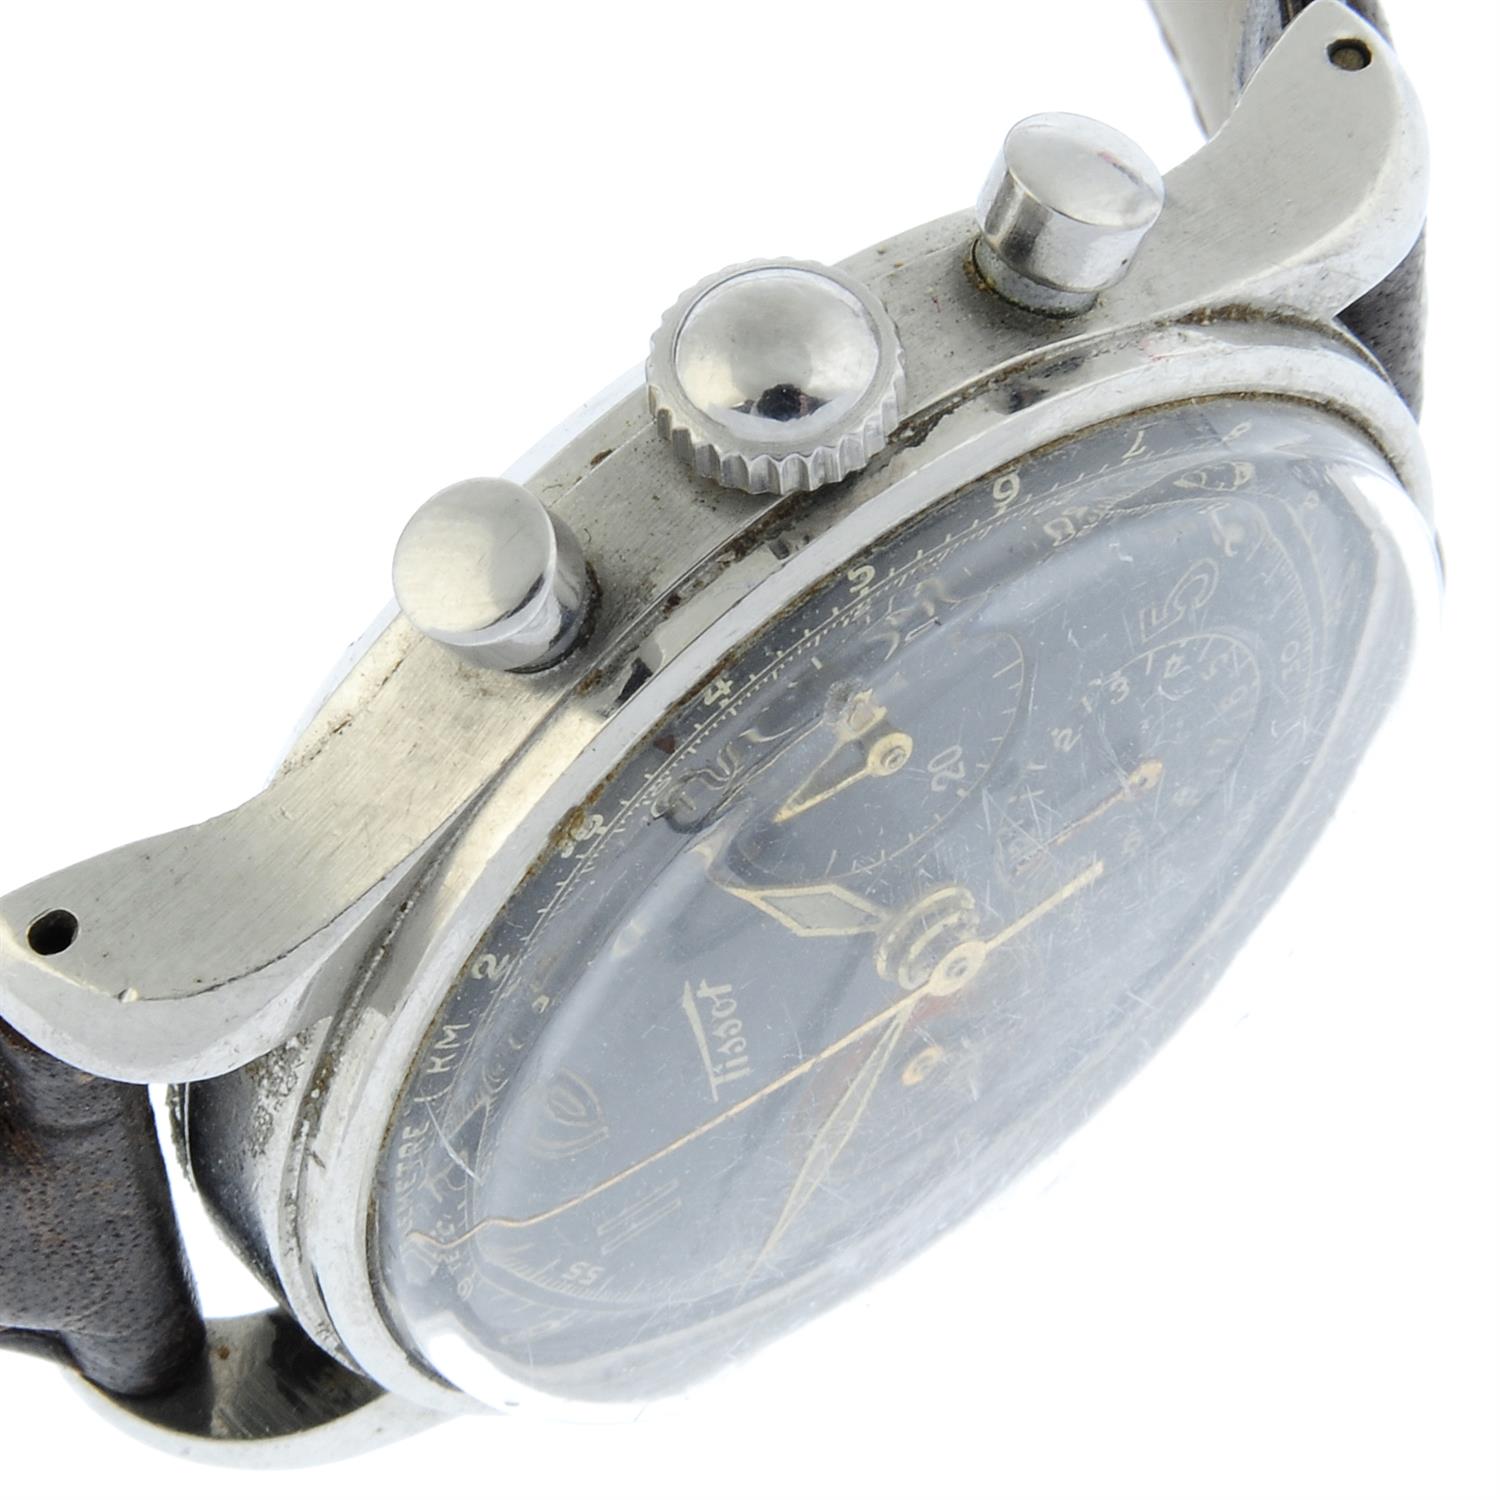 Tissot - a chronograph watch, 36mm. - Image 3 of 4